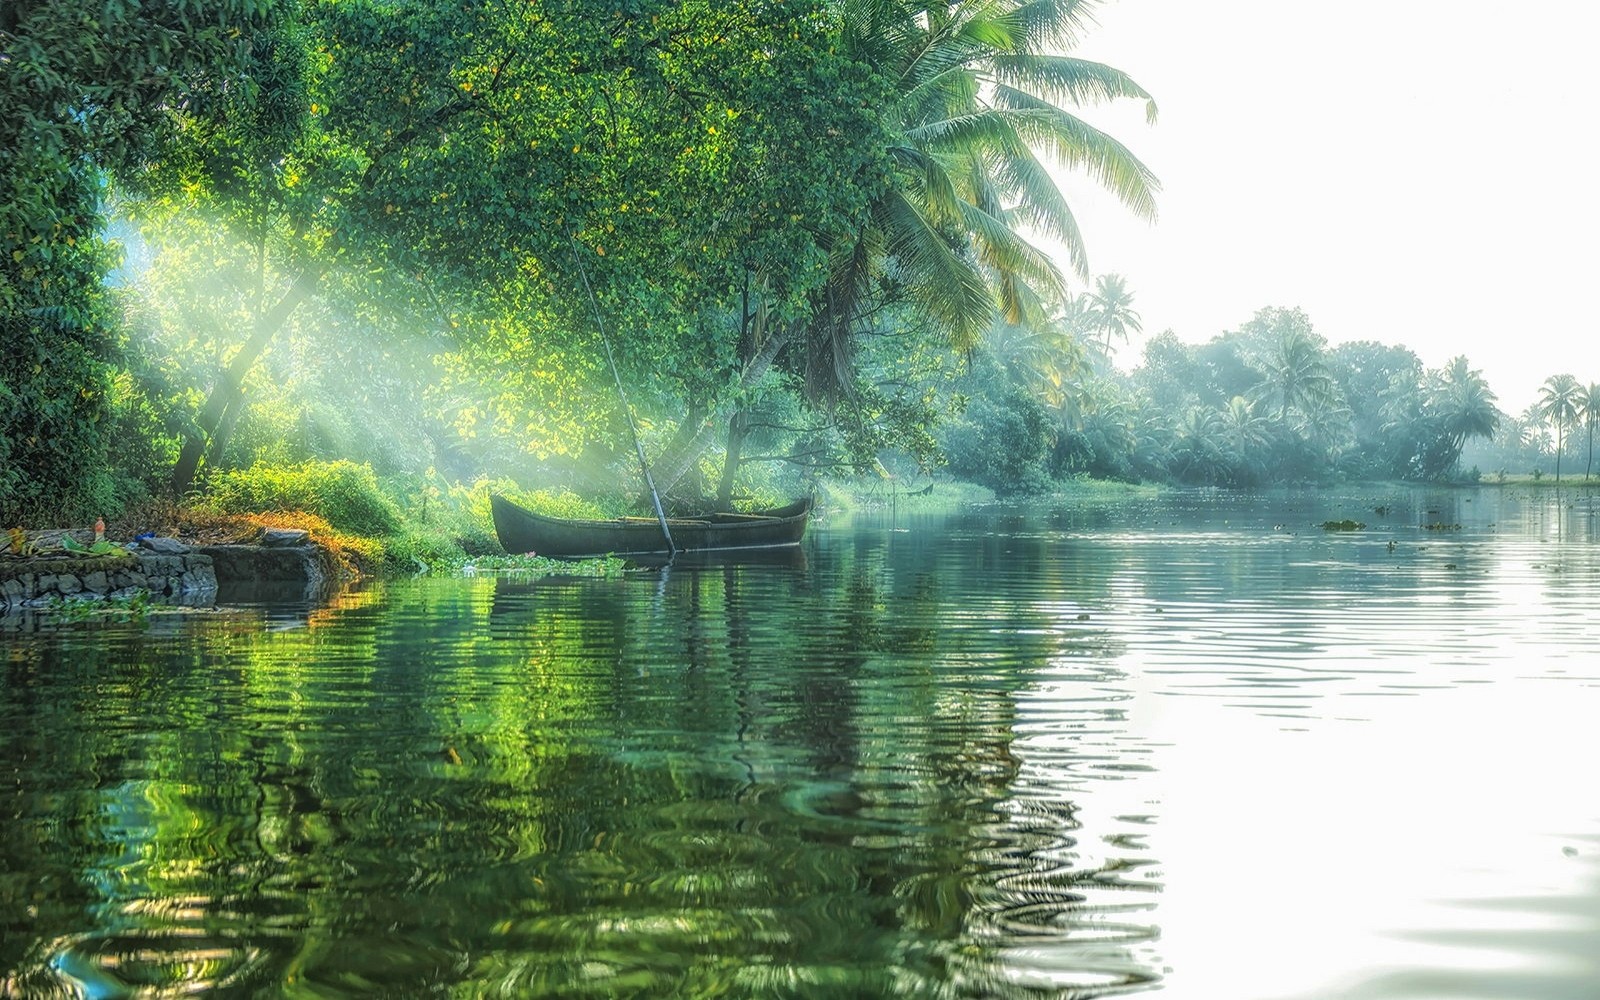 General 1600x1000 landscape nature lake sun rays boat trees palm trees mist green tropical water